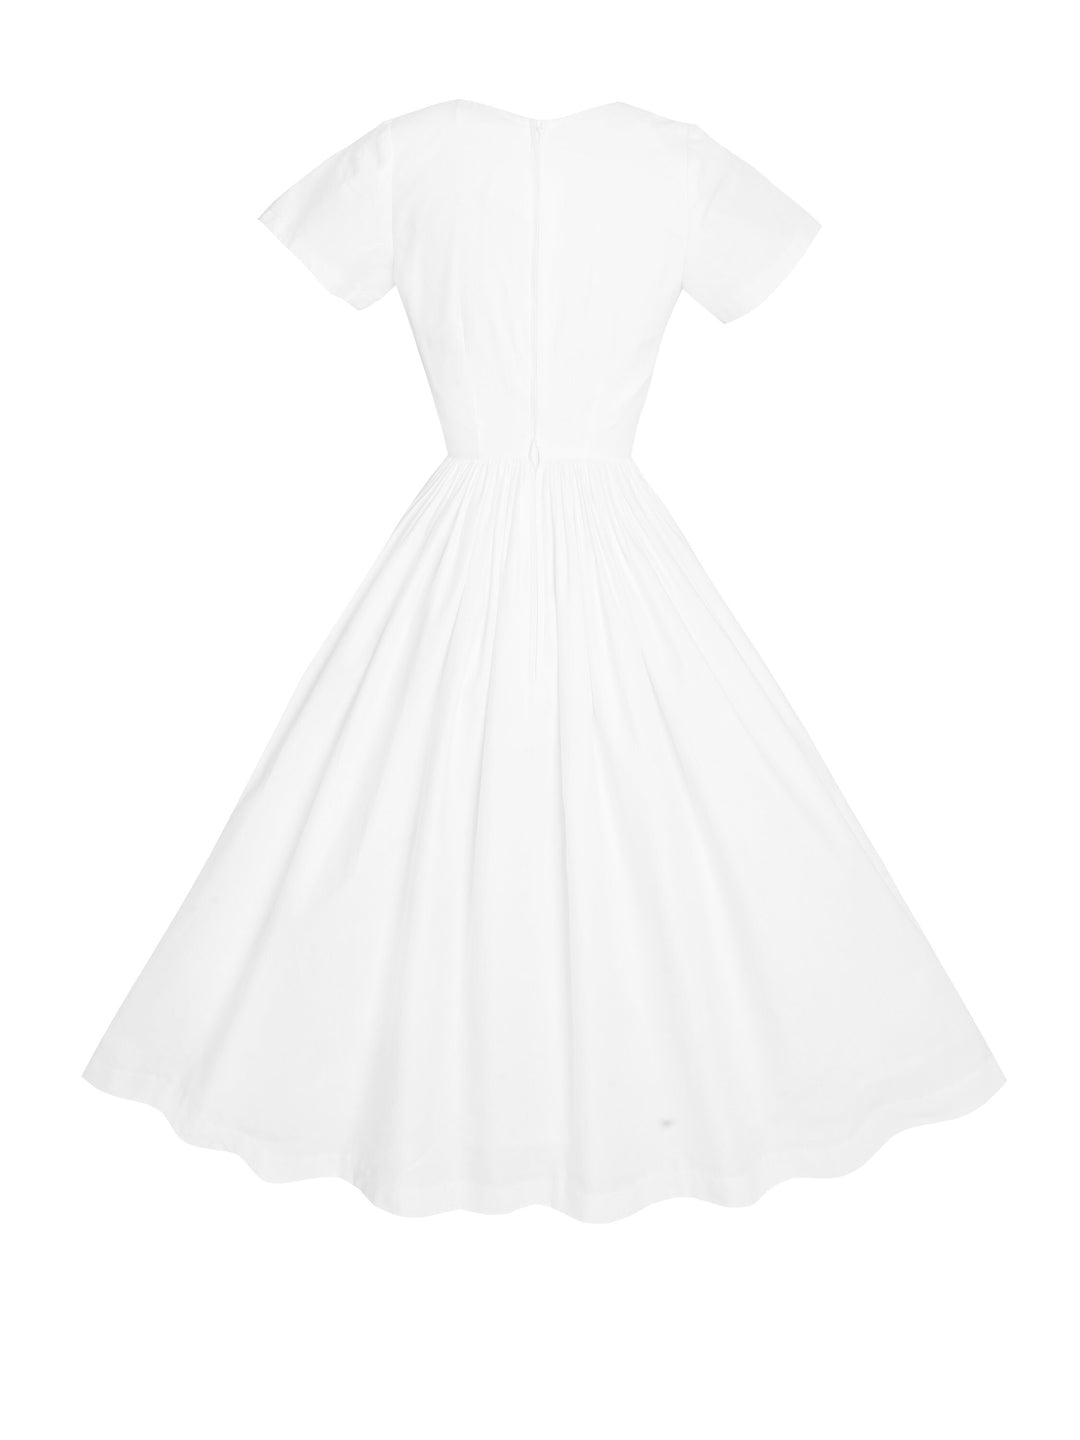 RTS - Size S - Dorothy Dress in White Cotton